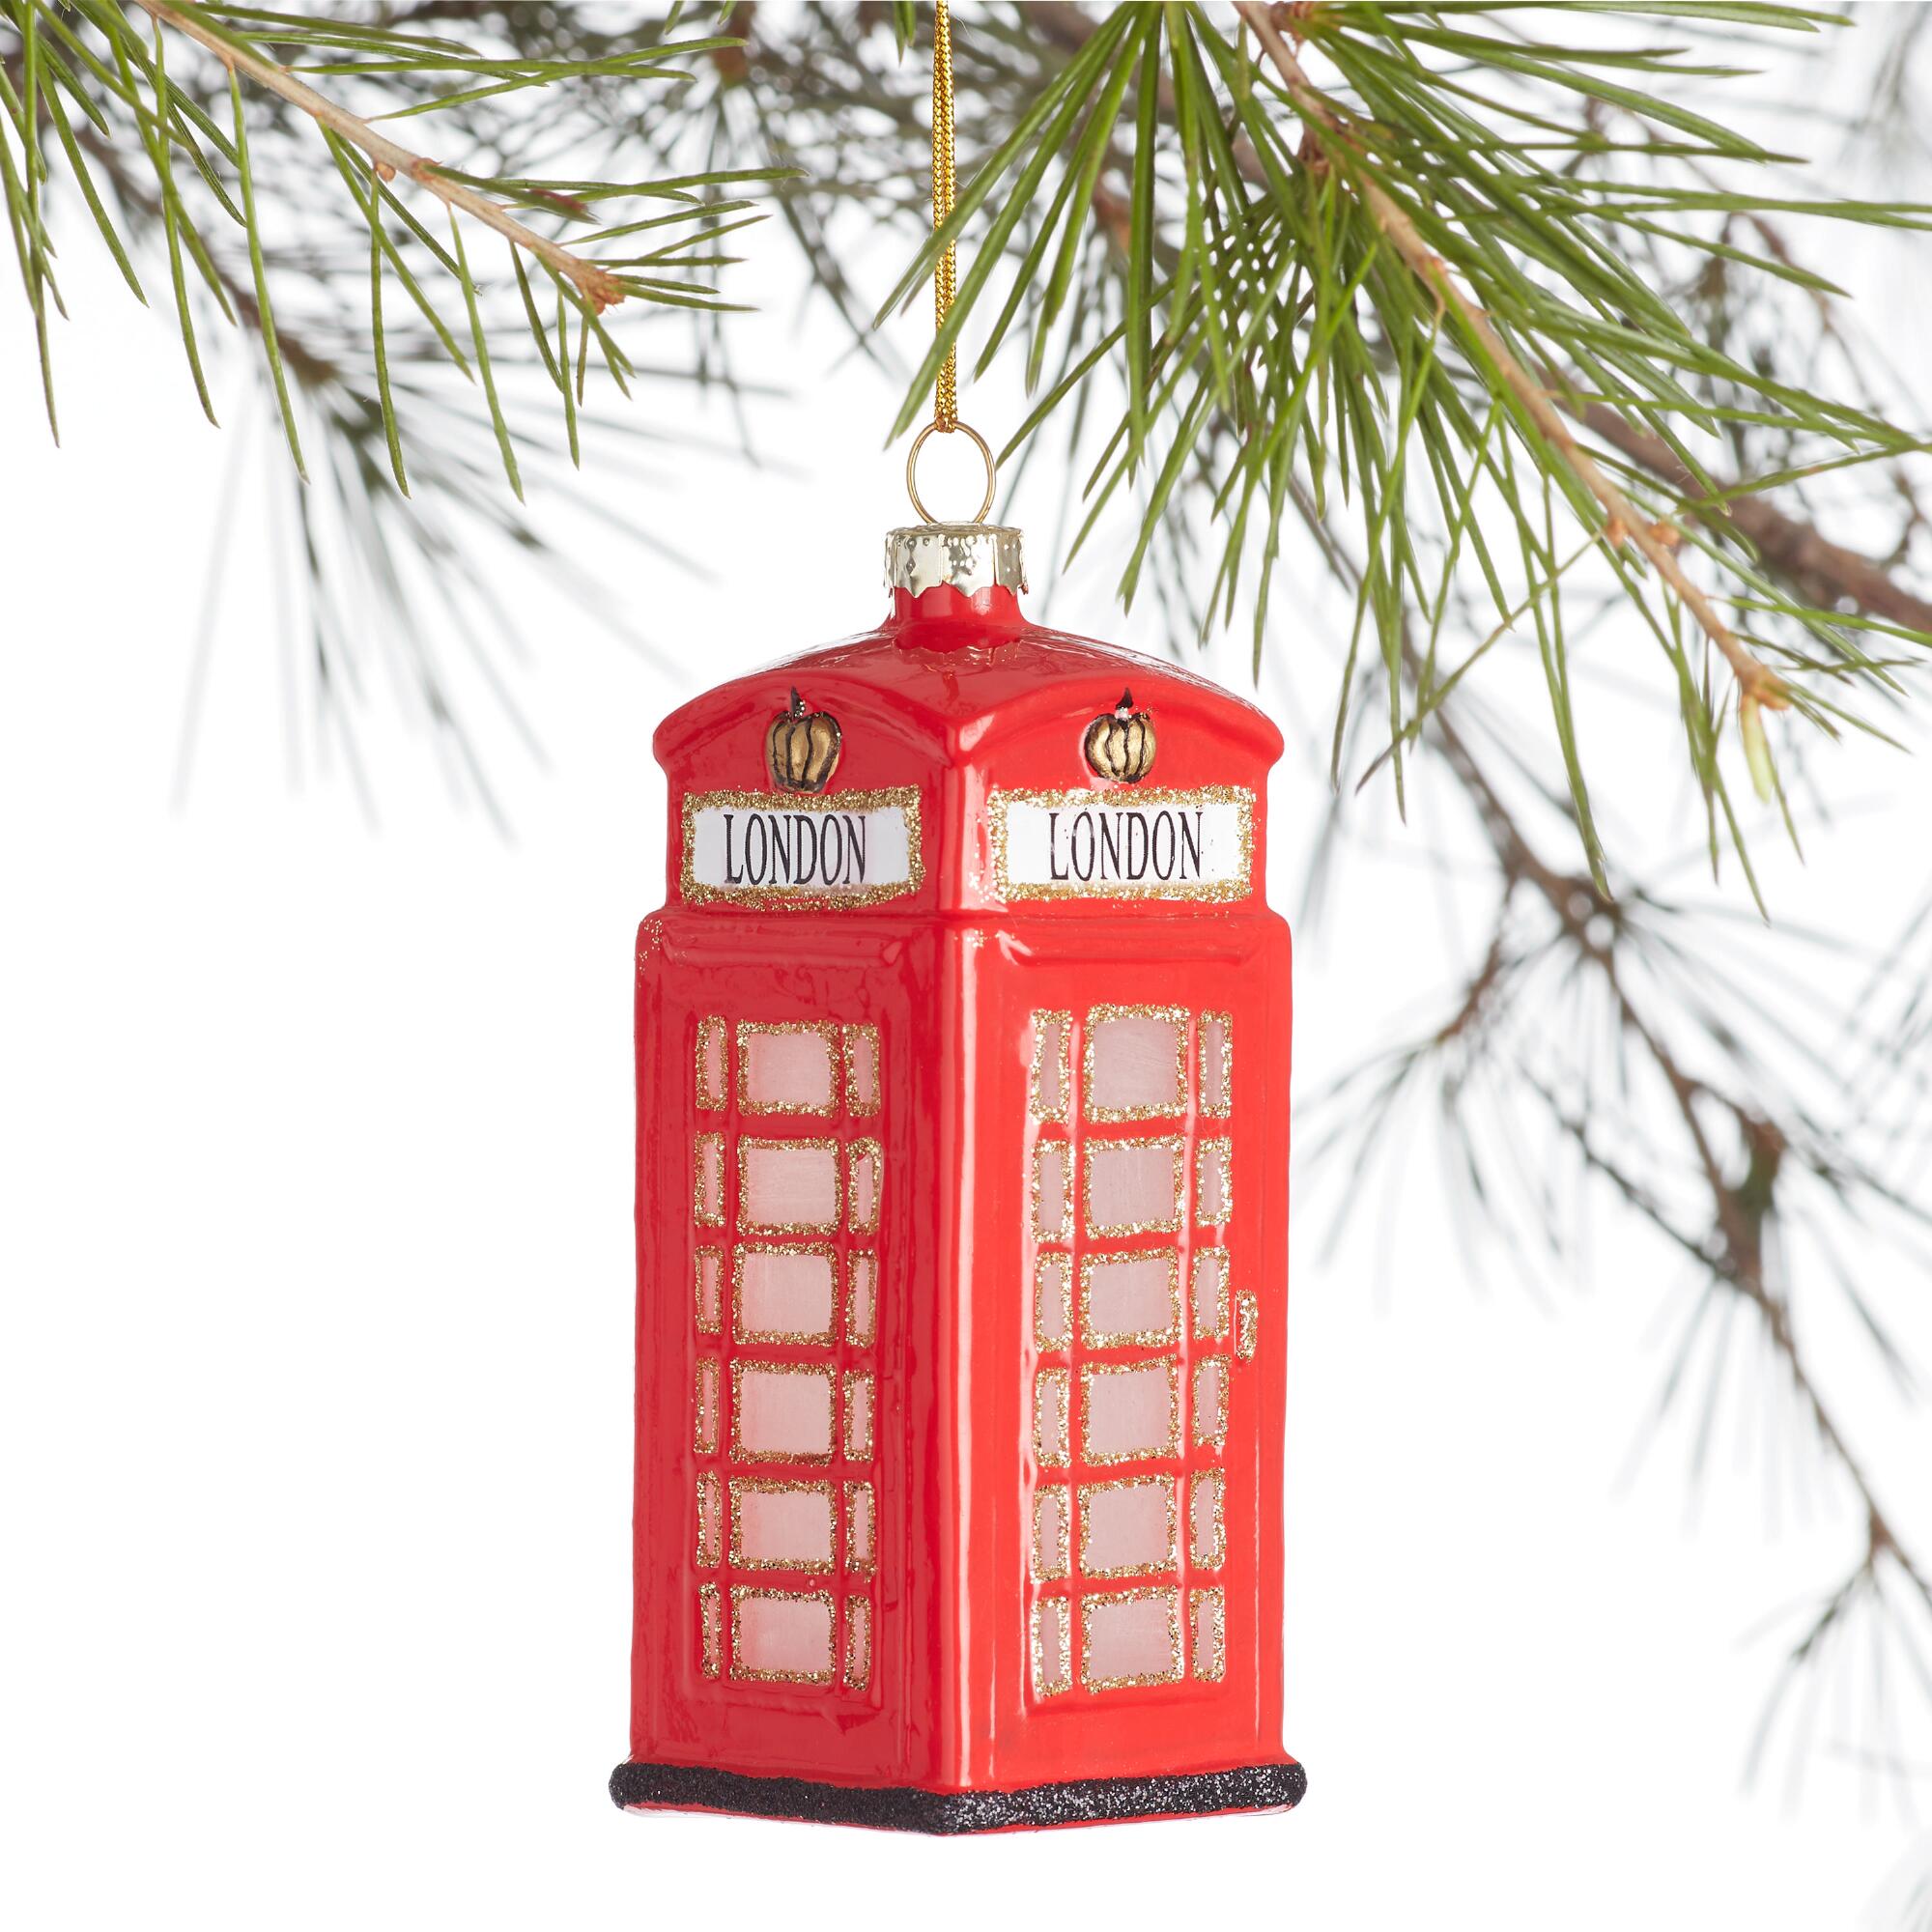 Glittered Glass London Phone Booth Ornament by World Market